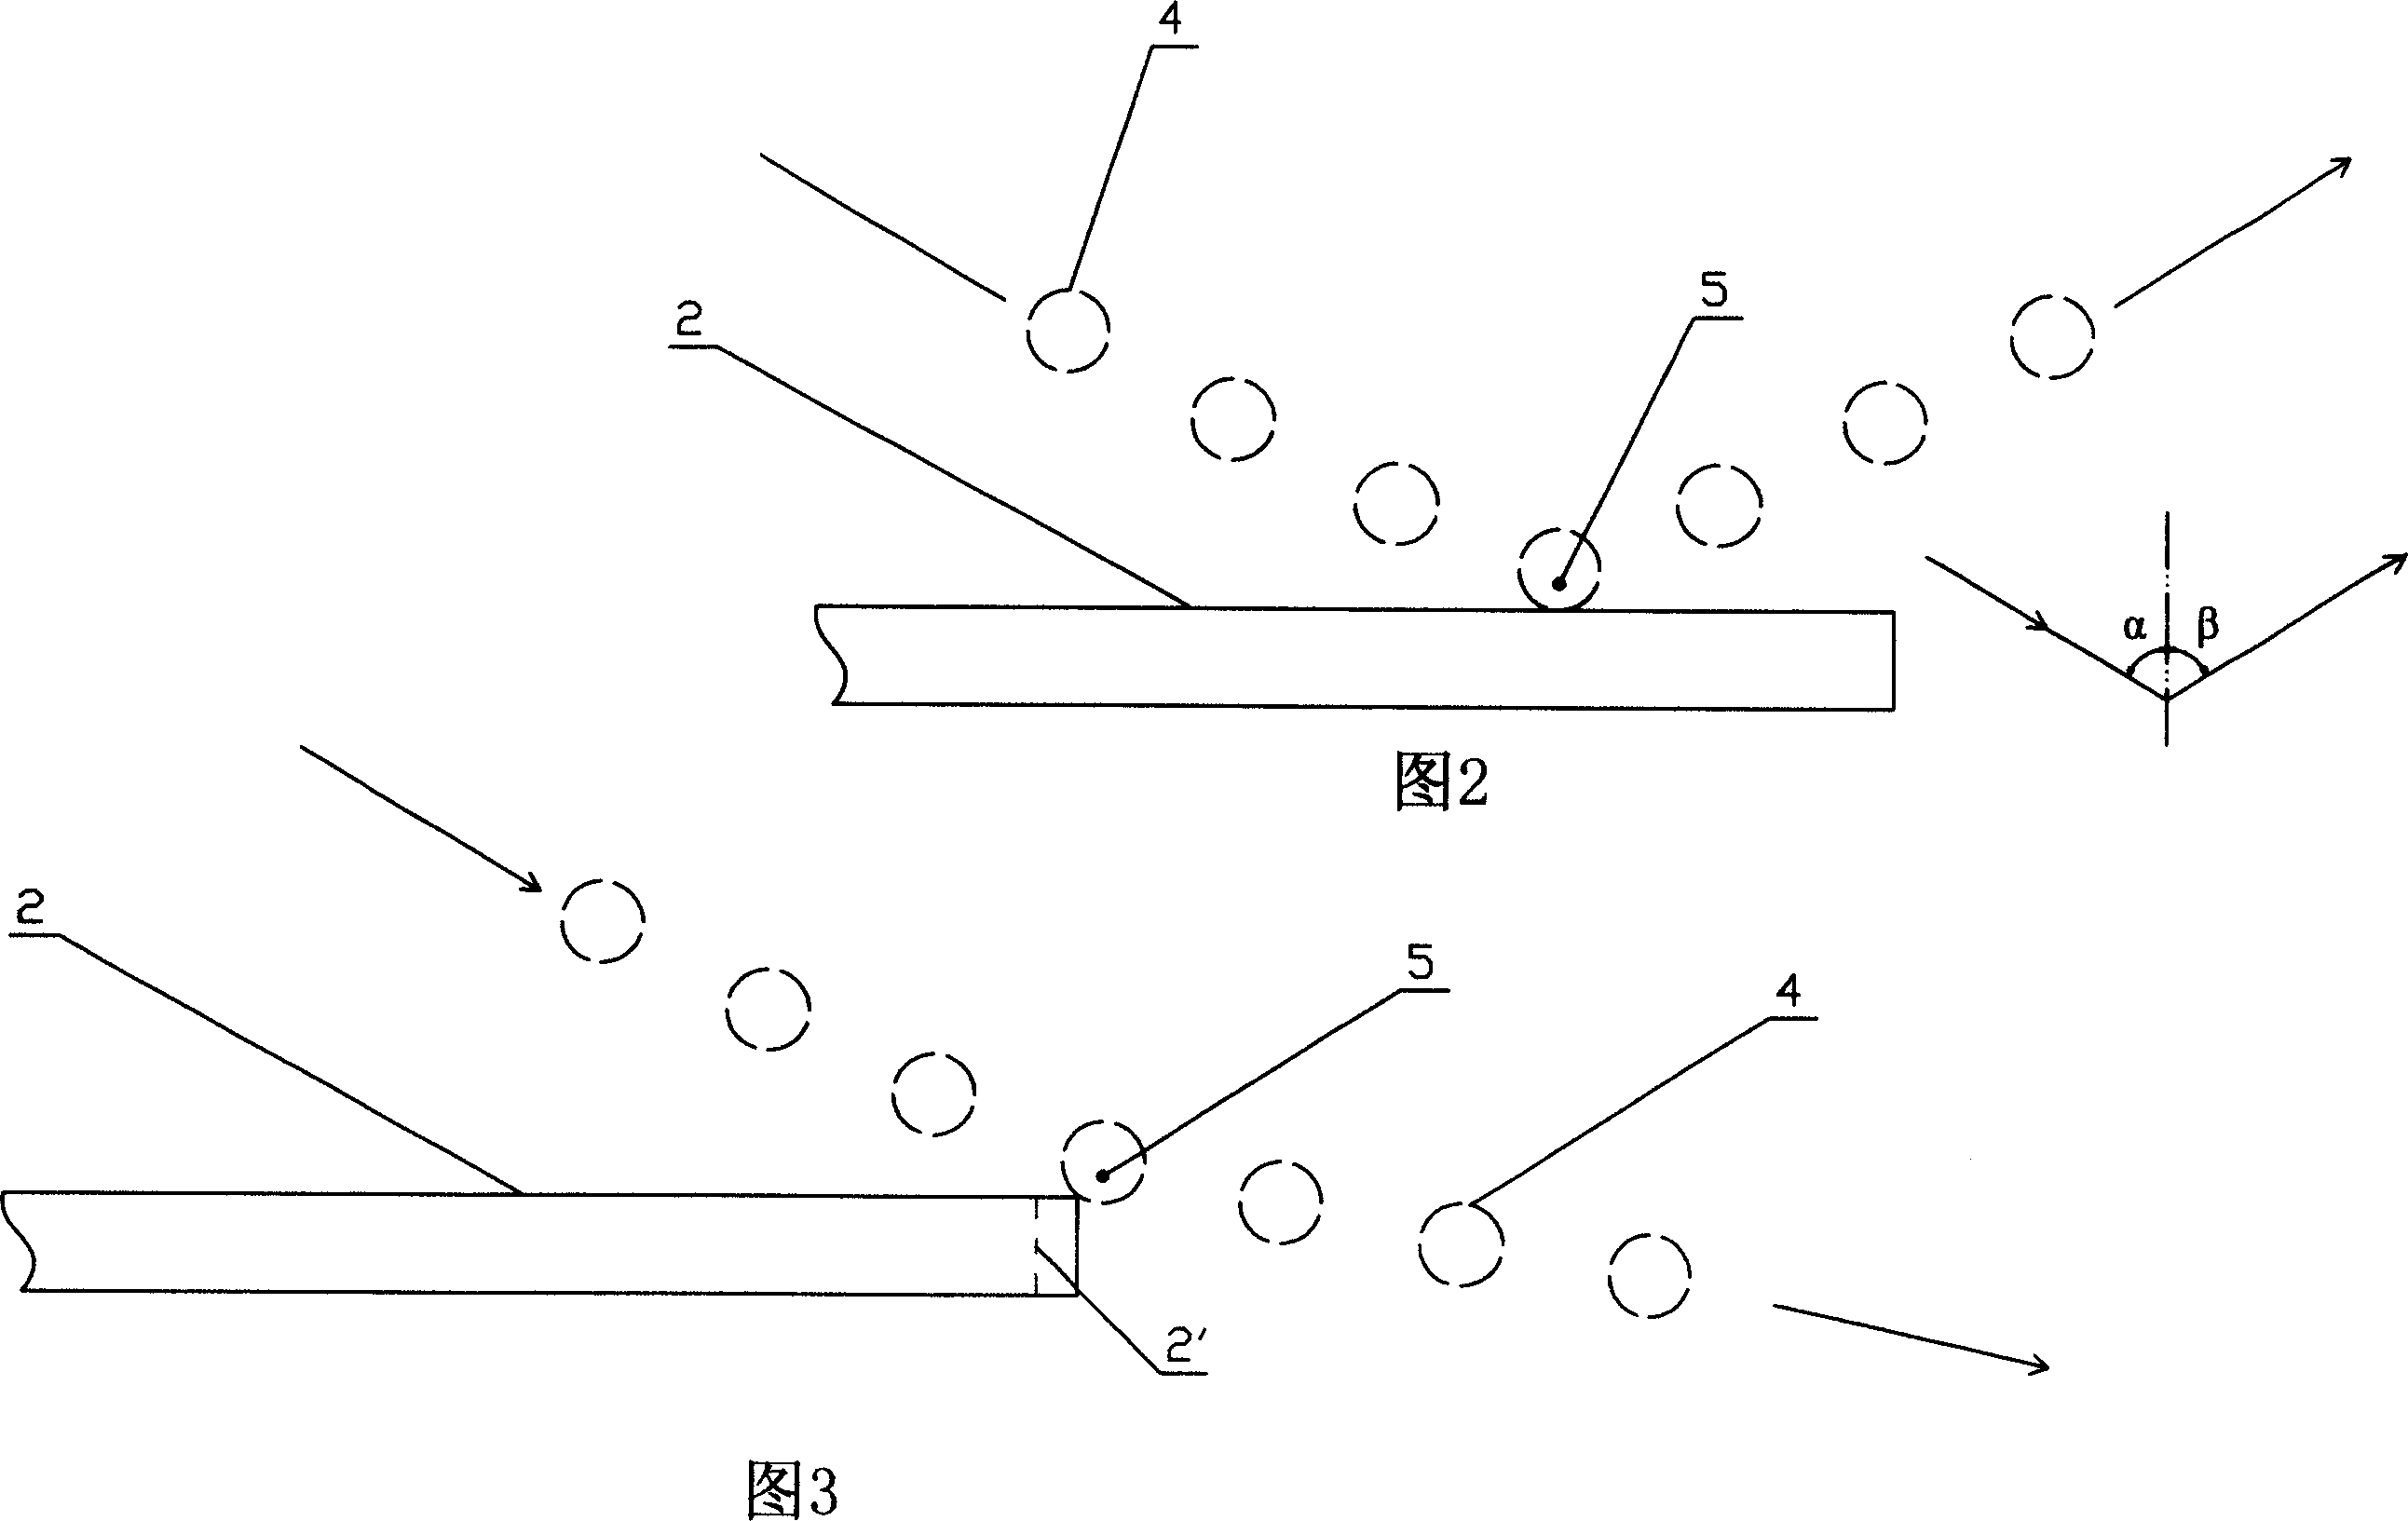 Method for not changing route of edge-wiping ball in standard ping-pong table and table in the method